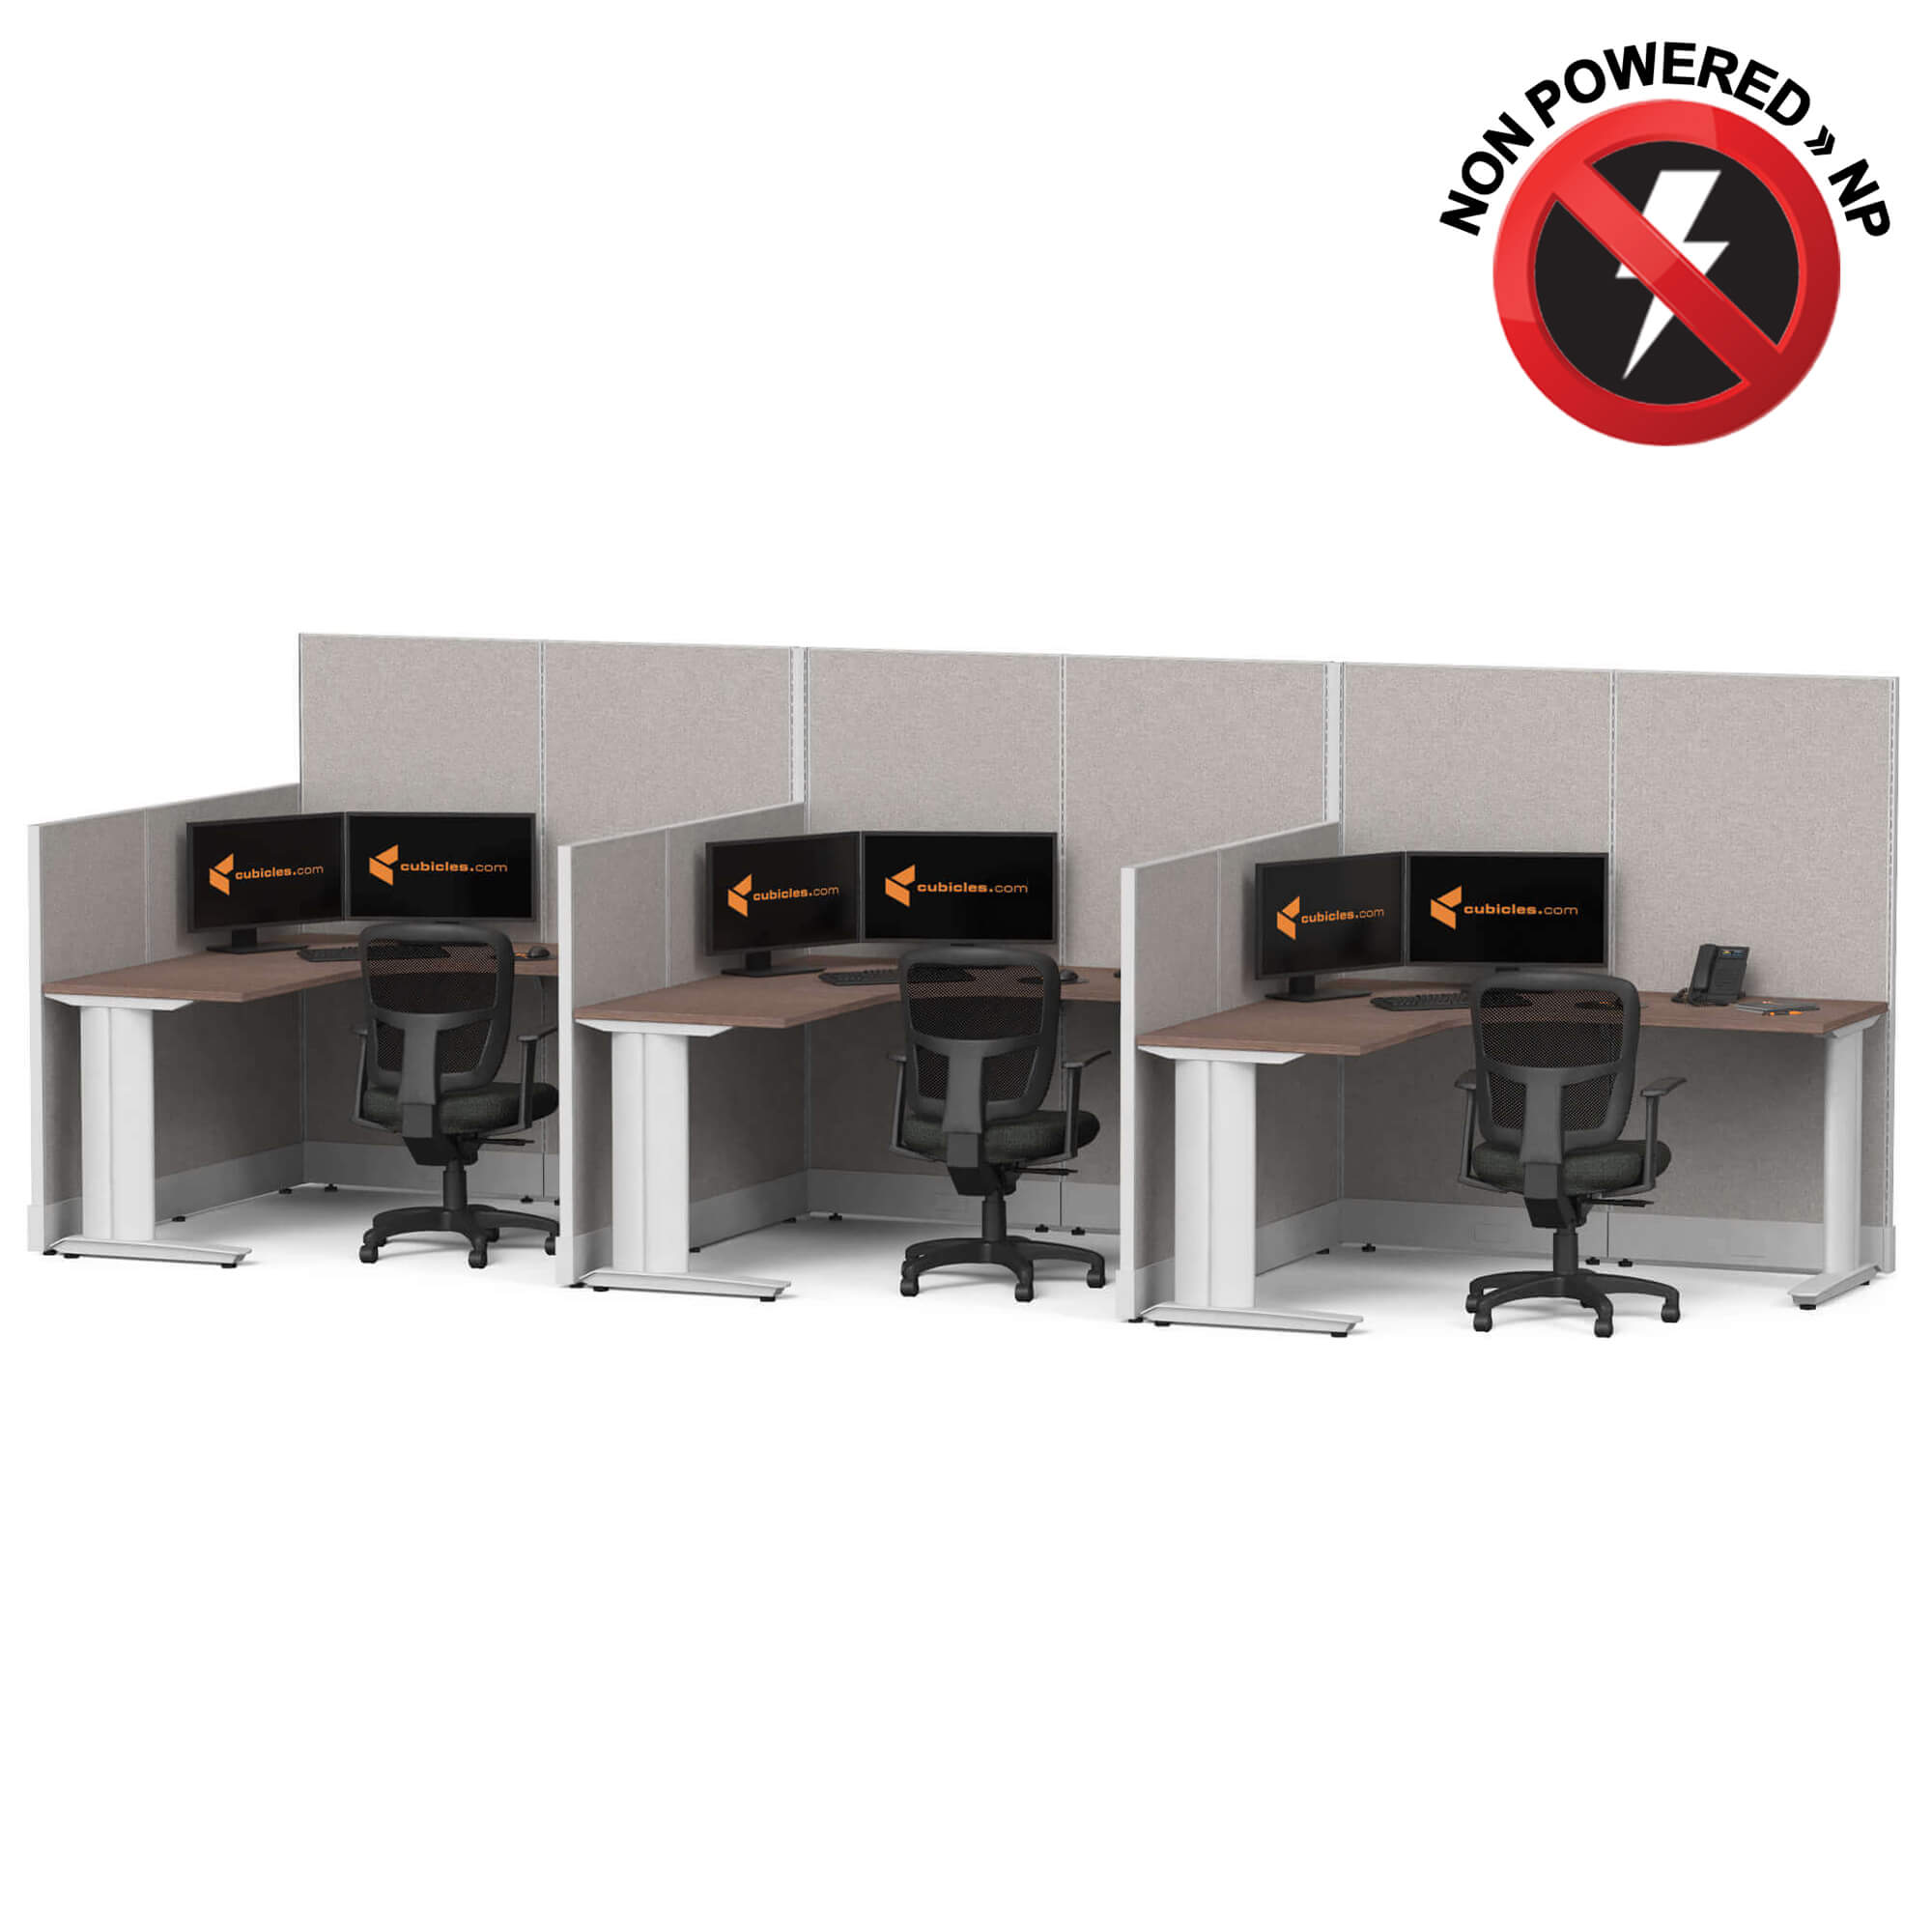 cubicle-desk-l-shaped-workstation-3pack-inline-non-powered-sign.jpg